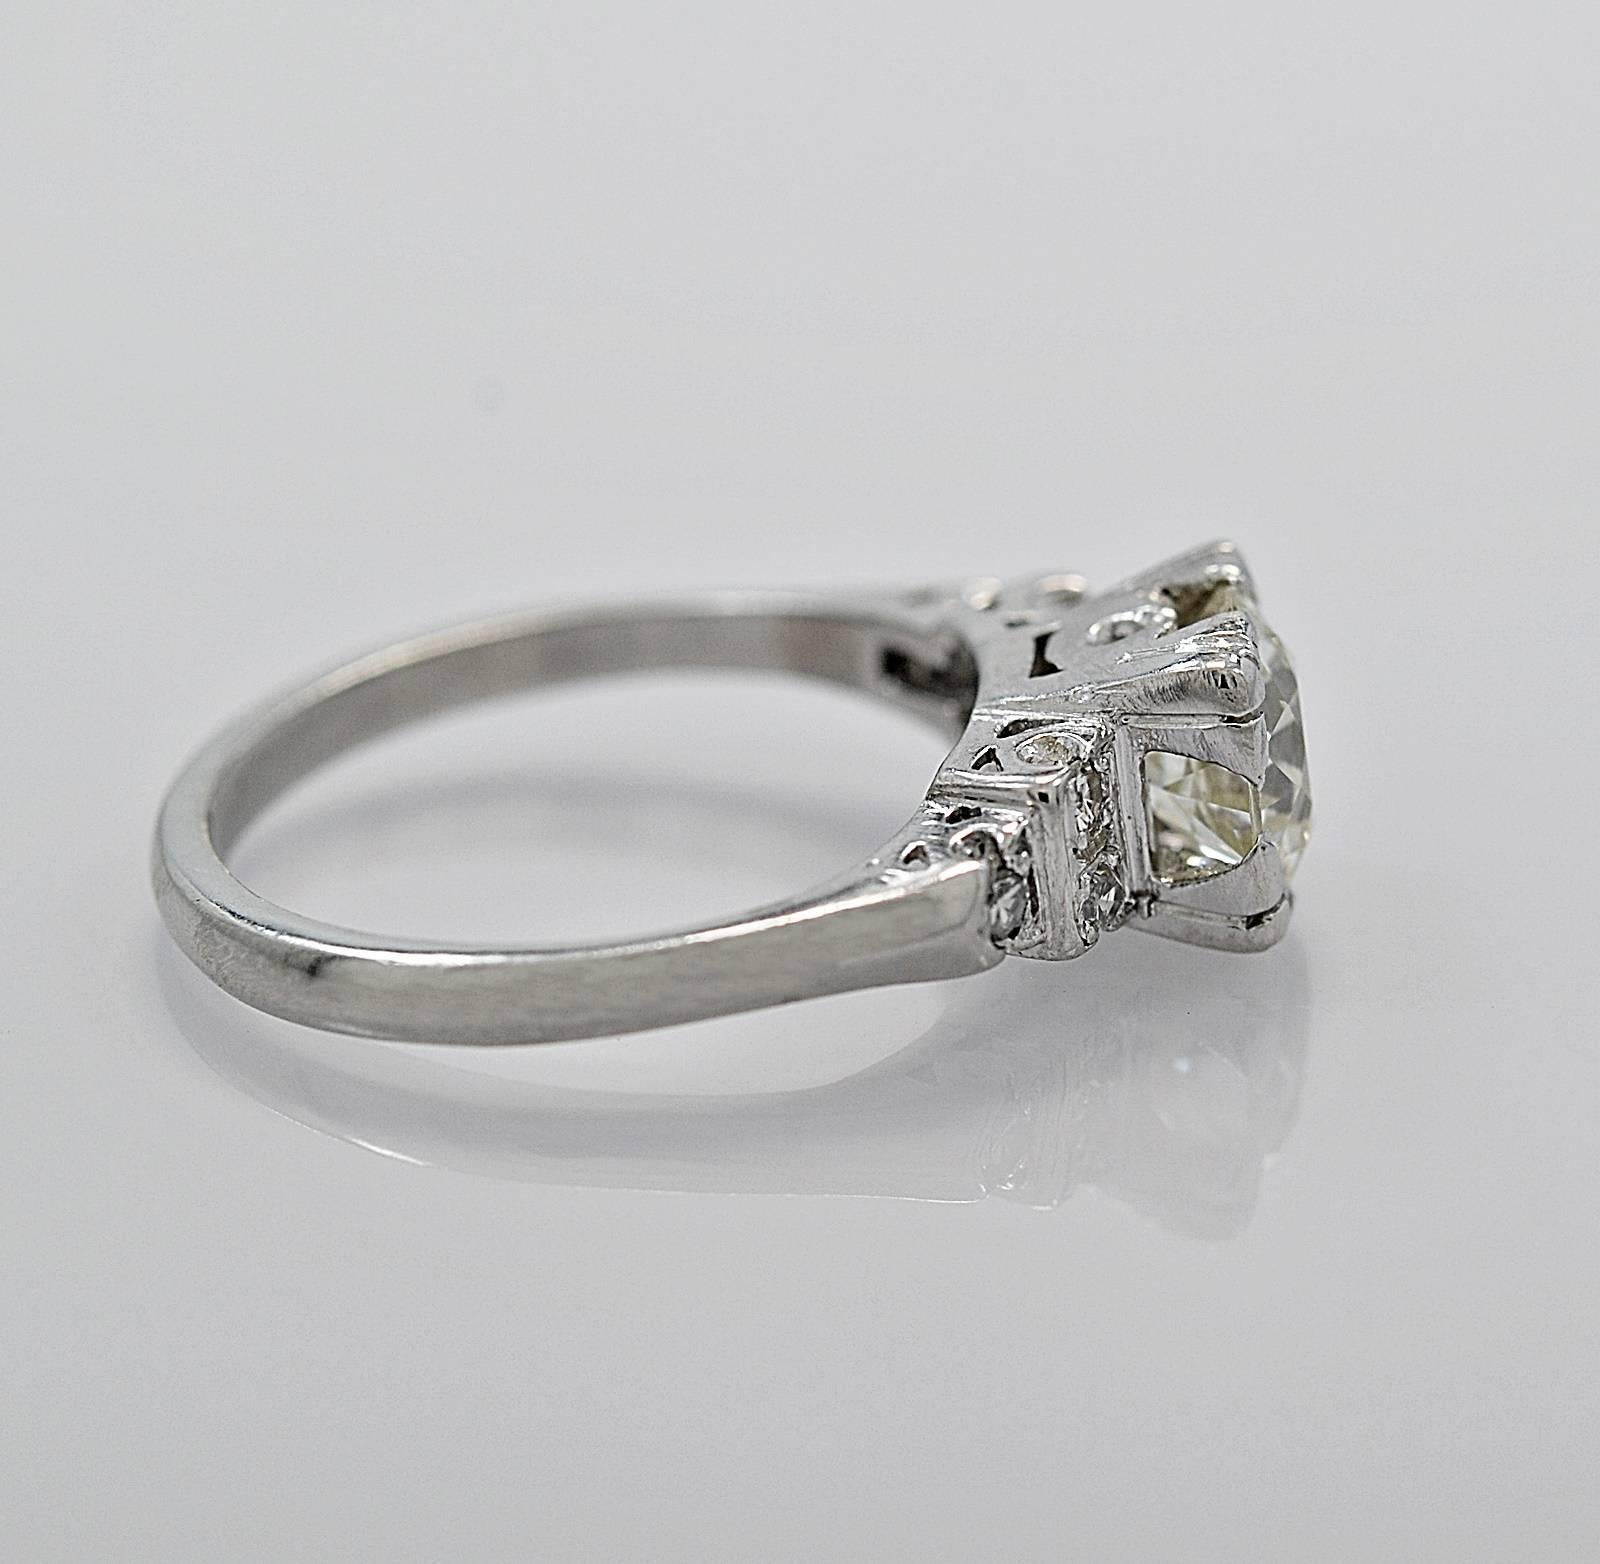 A dazzling antique engagement ring featuring a 1.31ct apx. European cut diamond with VS1 clarity and M color. It faces up very white. It has .06ct. apx. T.W. of single cut diamond melee decorating the sides of the center stone. This ring makes a